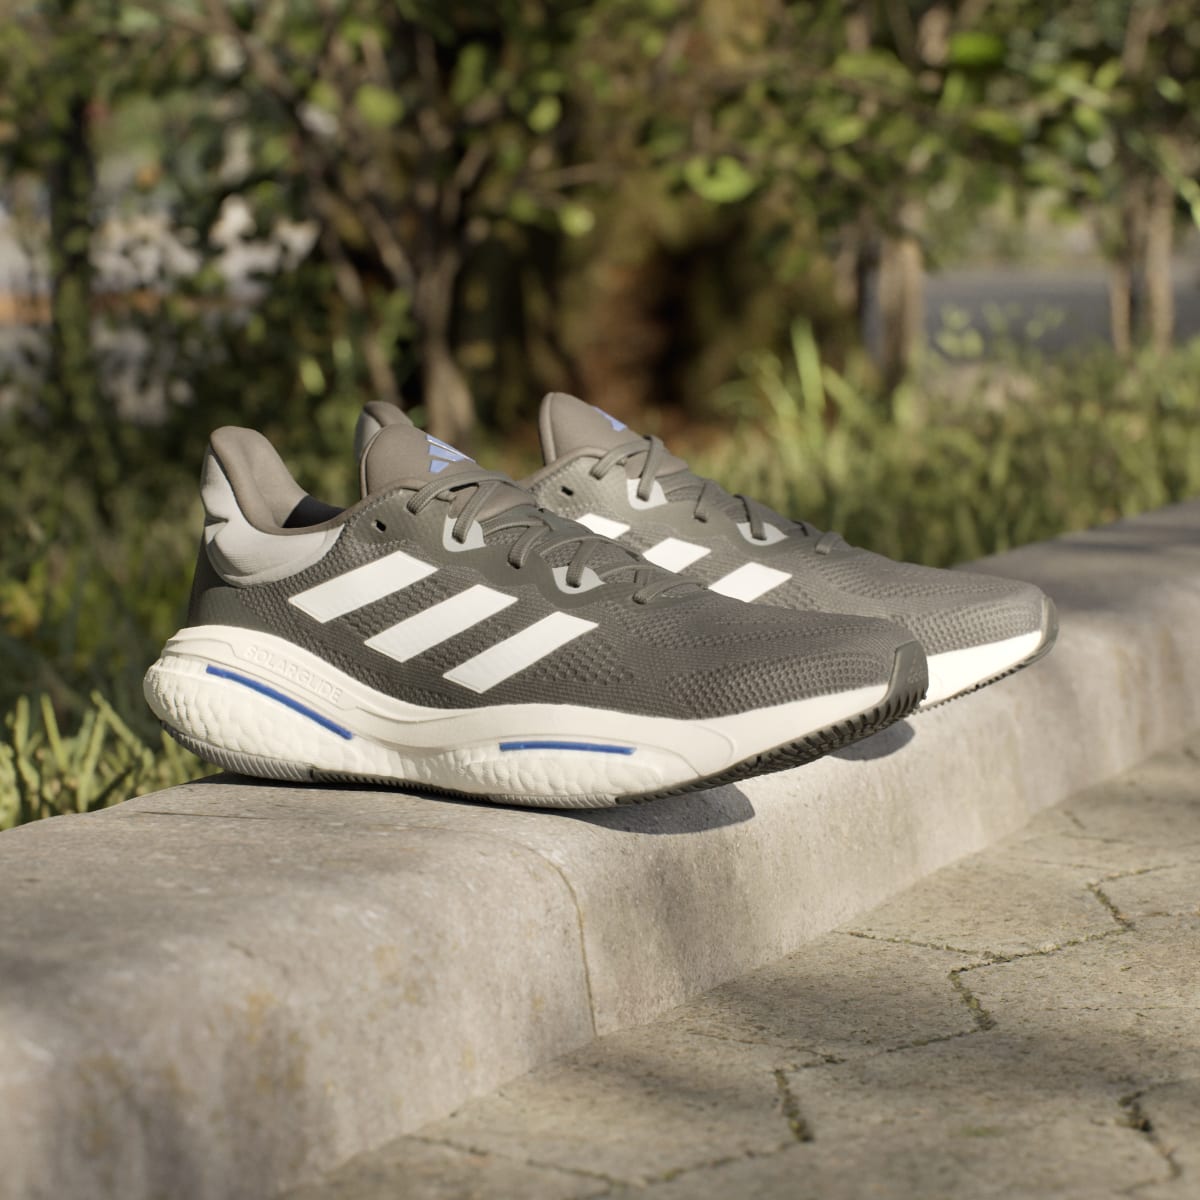 Adidas SOLARGLIDE 6 Shoes. 4